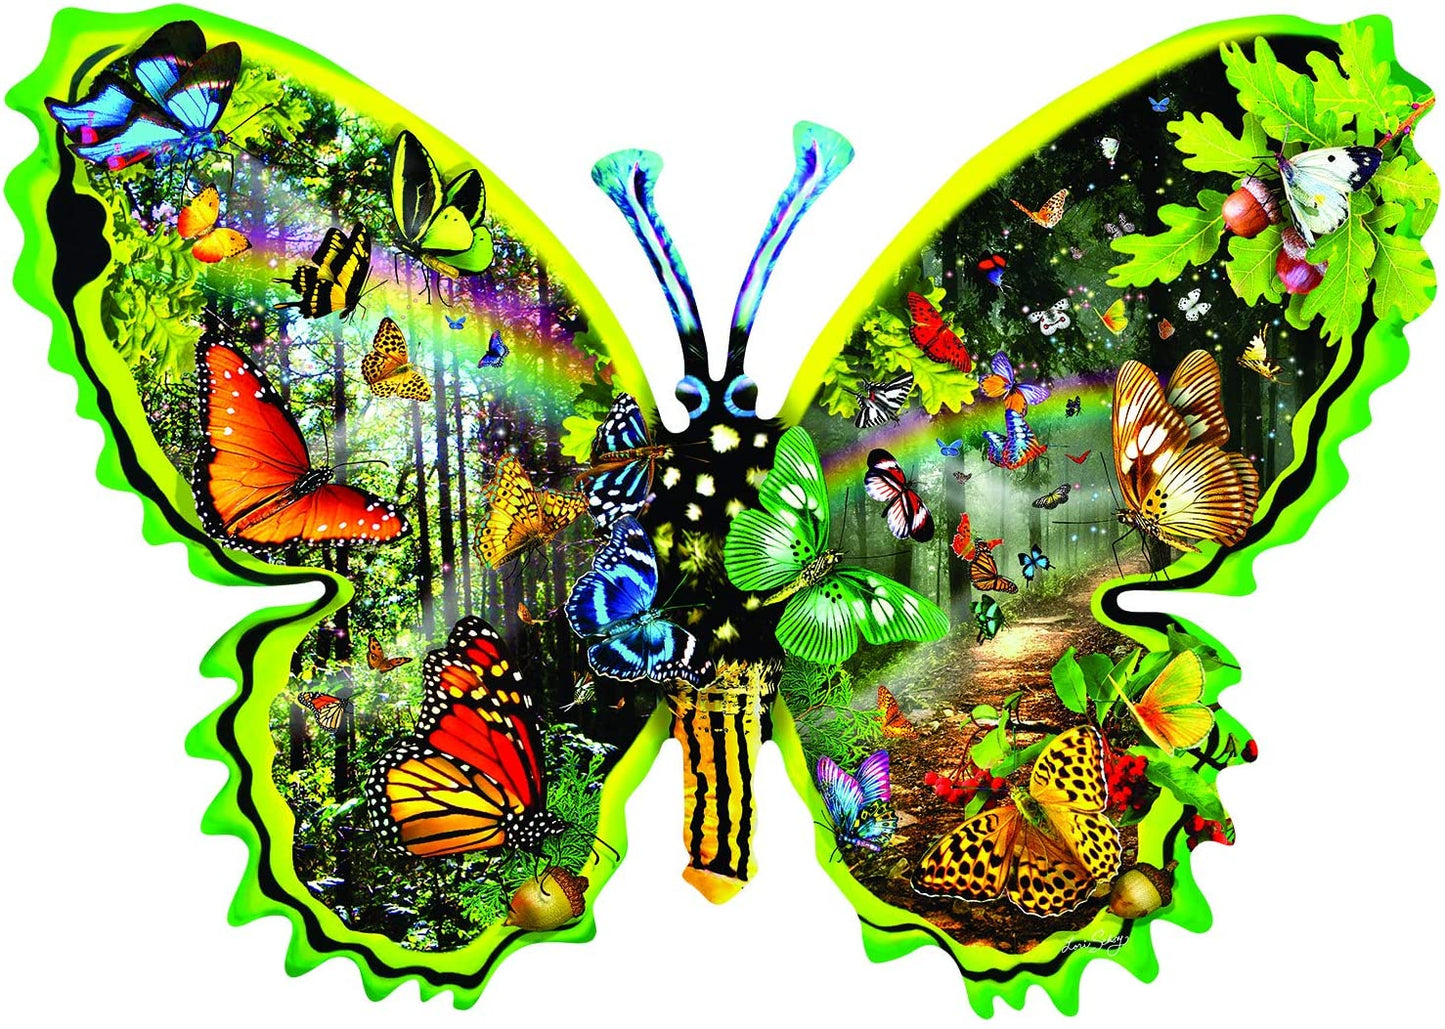 Butterfly Migration - 1000pc Shaped Jigsaw Puzzle By Sunsout